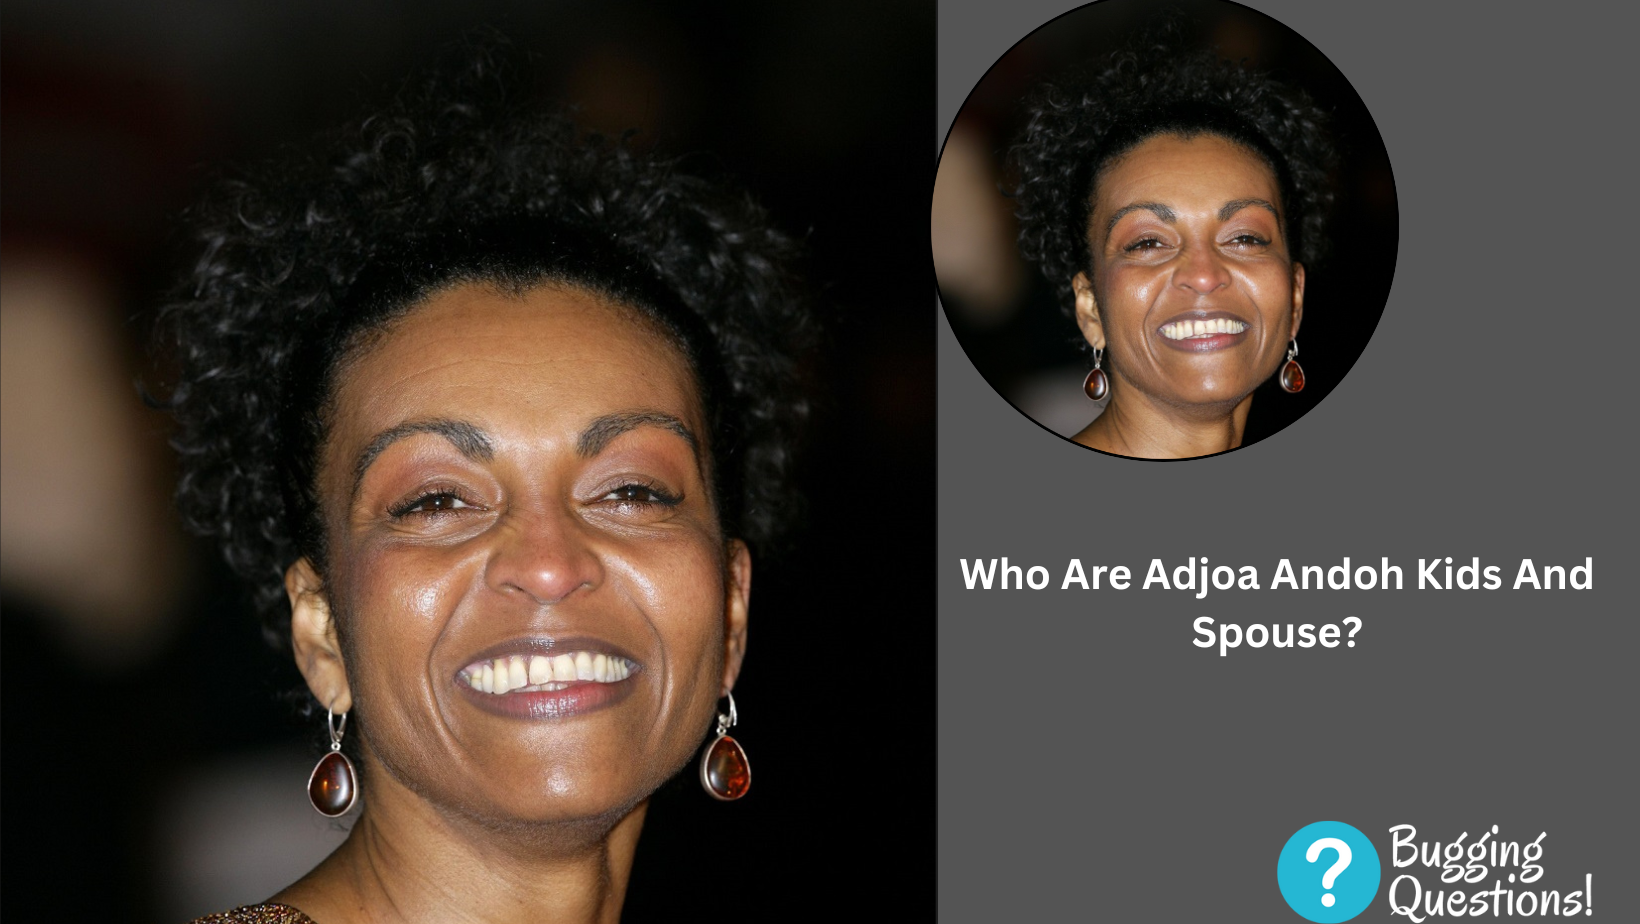 Who Are Adjoa Andoh Kids And Spouse?